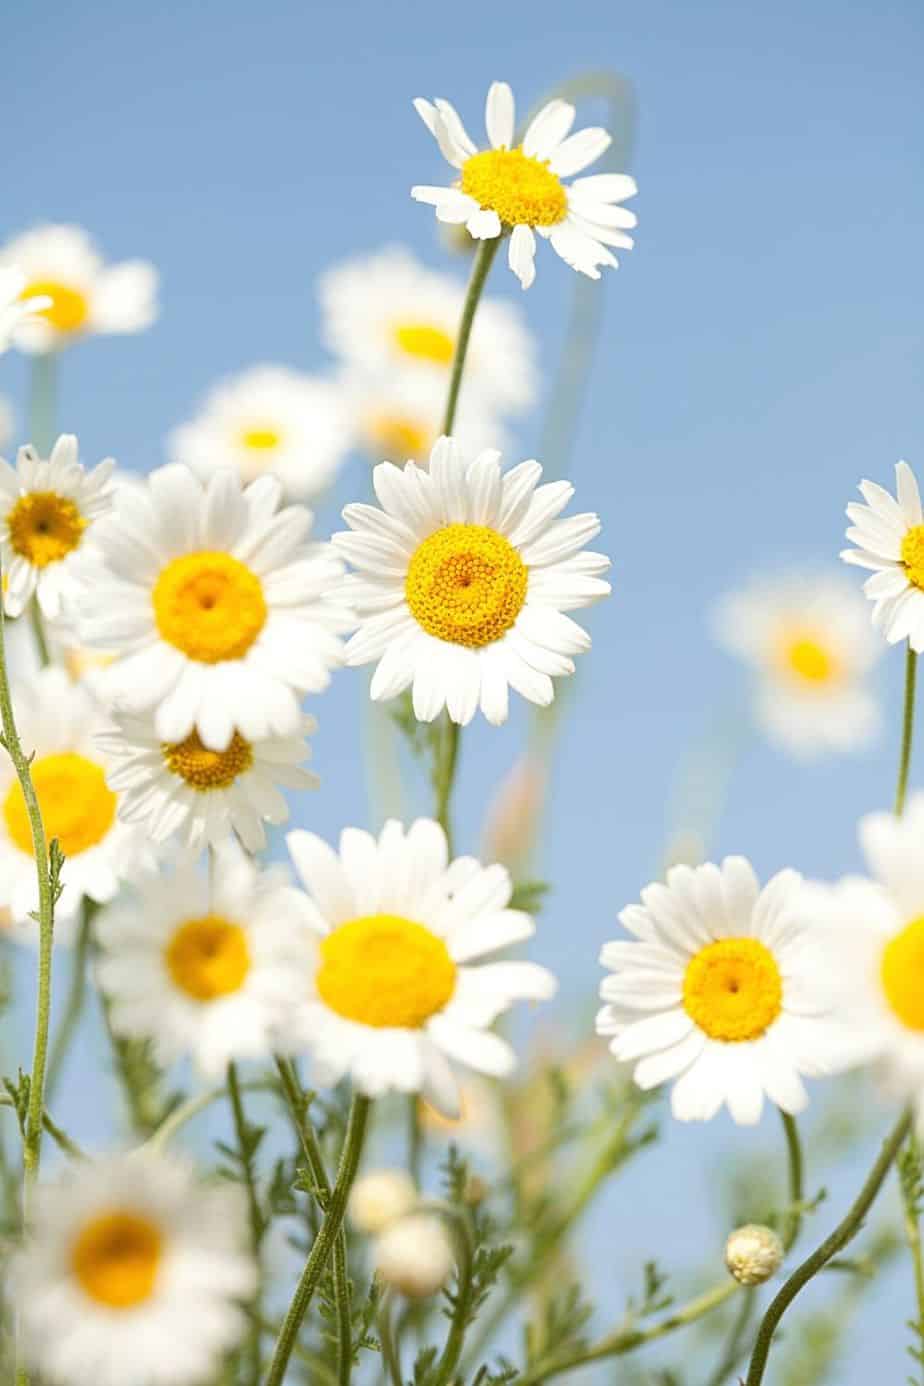 If you're searching for teas that can help you have better sleep, plant Chamomile on your south-facing balcony to have a steady supply of it